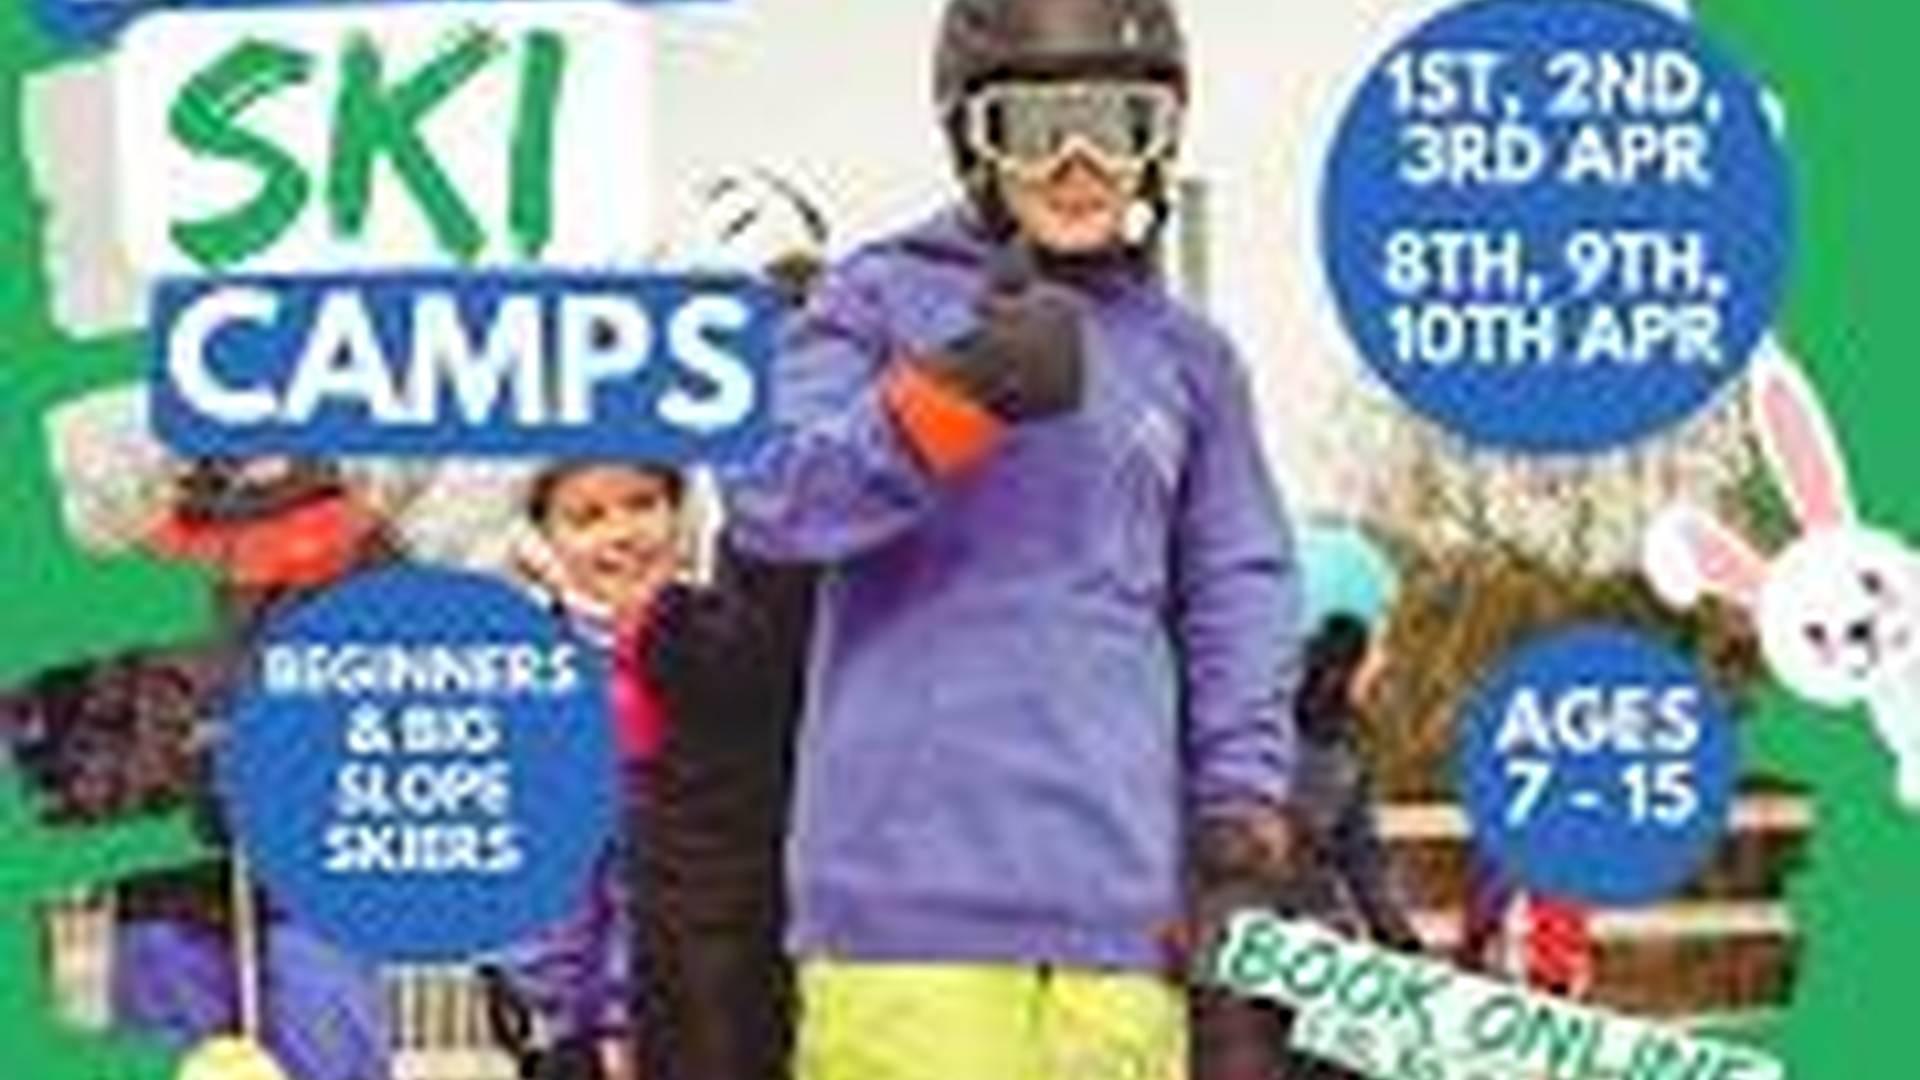 3-day camp - beginners and intermediates £105 photo